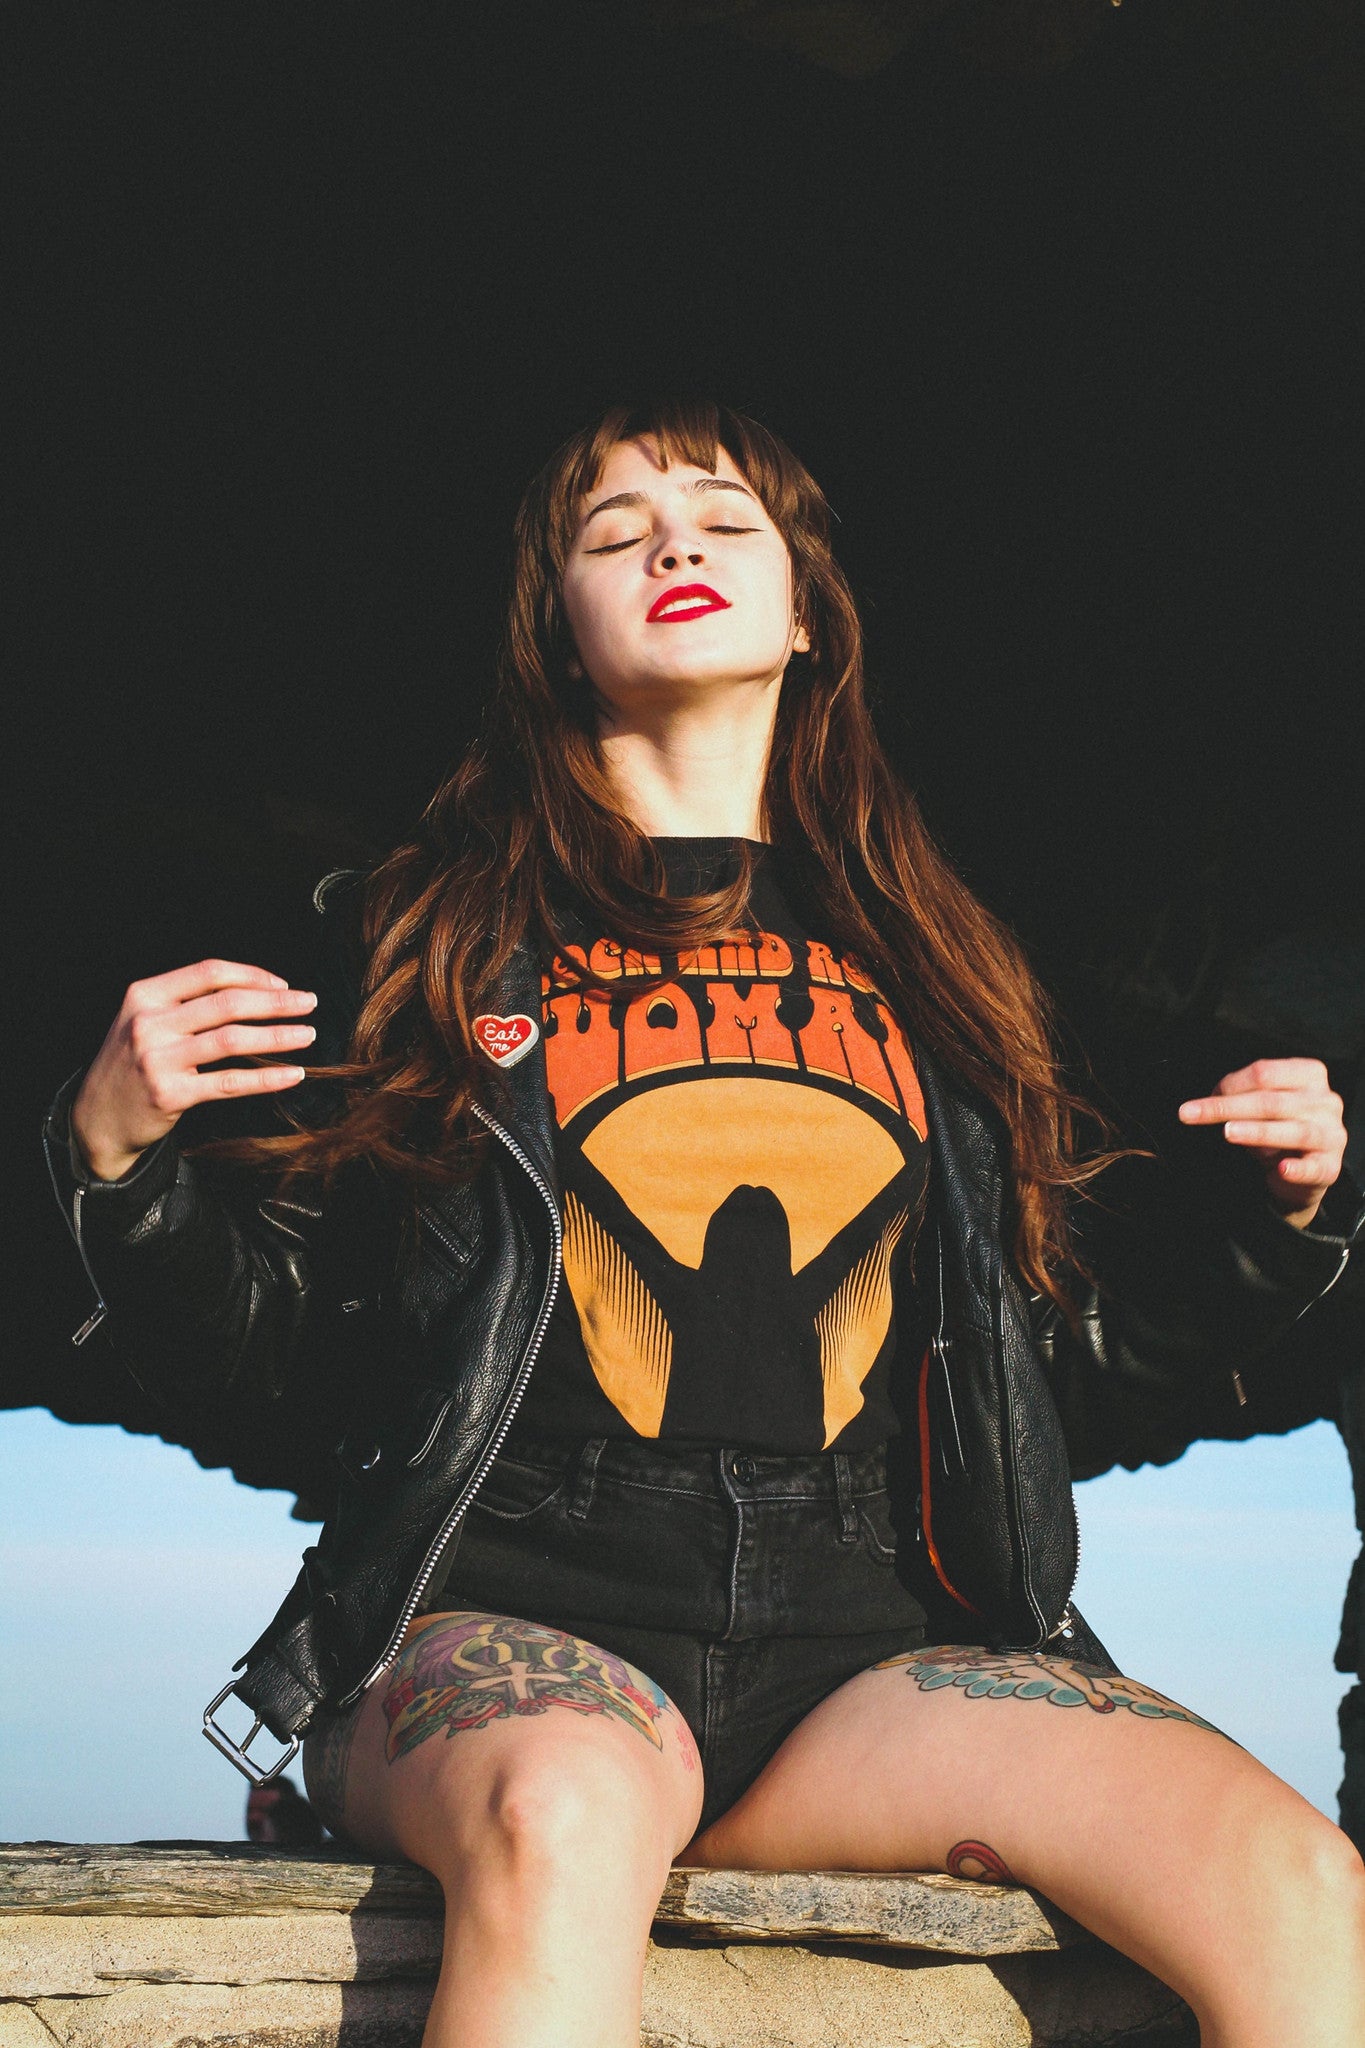 Rock and Roll Woman Tee